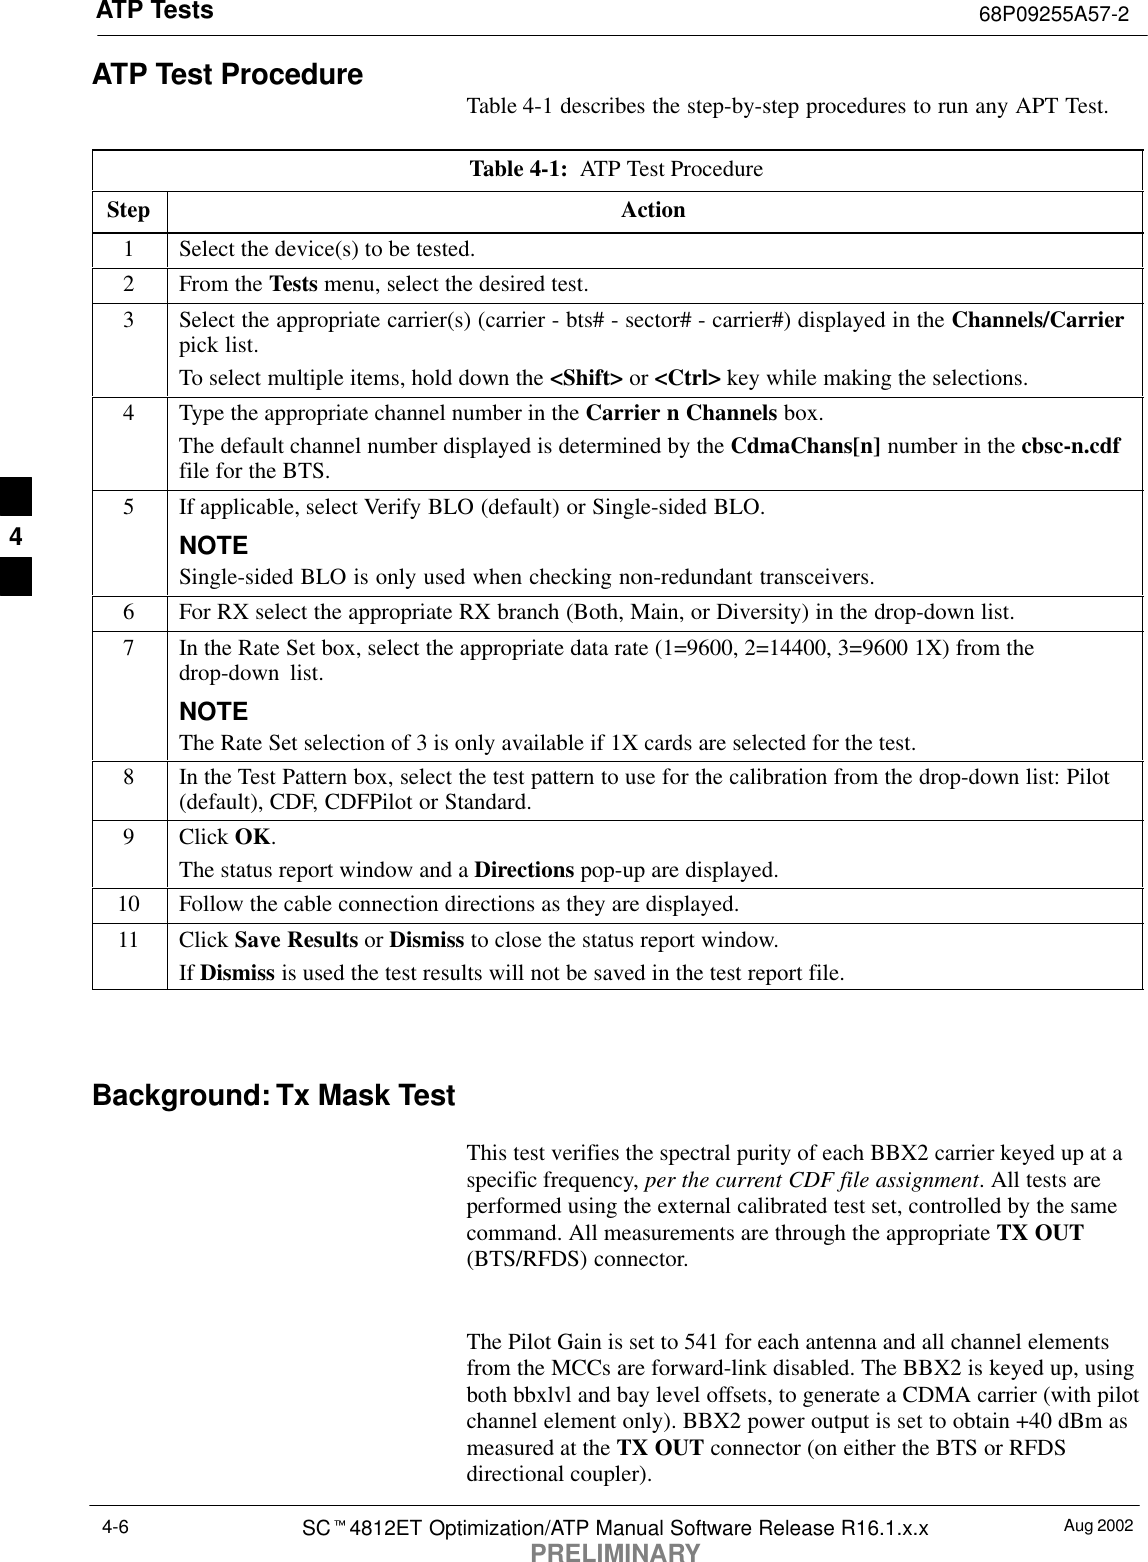 ATP Tests 68P09255A57-2Aug 2002SCt4812ET Optimization/ATP Manual Software Release R16.1.x.xPRELIMINARY4-6ATP Test Procedure Table 4-1 describes the step-by-step procedures to run any APT Test.Table 4-1:  ATP Test ProcedureStep Action1Select the device(s) to be tested.2From the Tests menu, select the desired test.3Select the appropriate carrier(s) (carrier - bts# - sector# - carrier#) displayed in the Channels/Carrierpick list.To select multiple items, hold down the &lt;Shift&gt; or &lt;Ctrl&gt; key while making the selections.4Type the appropriate channel number in the Carrier n Channels box.The default channel number displayed is determined by the CdmaChans[n] number in the cbsc-n.cdffile for the BTS.5If applicable, select Verify BLO (default) or Single-sided BLO.NOTESingle-sided BLO is only used when checking non-redundant transceivers.6For RX select the appropriate RX branch (Both, Main, or Diversity) in the drop-down list.7In the Rate Set box, select the appropriate data rate (1=9600, 2=14400, 3=9600 1X) from thedrop-down list.NOTEThe Rate Set selection of 3 is only available if 1X cards are selected for the test.8In the Test Pattern box, select the test pattern to use for the calibration from the drop-down list: Pilot(default), CDF, CDFPilot or Standard.9 Click OK.The status report window and a Directions pop-up are displayed.10 Follow the cable connection directions as they are displayed.11 Click Save Results or Dismiss to close the status report window. If Dismiss is used the test results will not be saved in the test report file. Background: Tx Mask TestThis test verifies the spectral purity of each BBX2 carrier keyed up at aspecific frequency, per the current CDF file assignment. All tests areperformed using the external calibrated test set, controlled by the samecommand. All measurements are through the appropriate TX OUT(BTS/RFDS) connector.The Pilot Gain is set to 541 for each antenna and all channel elementsfrom the MCCs are forward-link disabled. The BBX2 is keyed up, usingboth bbxlvl and bay level offsets, to generate a CDMA carrier (with pilotchannel element only). BBX2 power output is set to obtain +40 dBm asmeasured at the TX OUT connector (on either the BTS or RFDSdirectional coupler).4